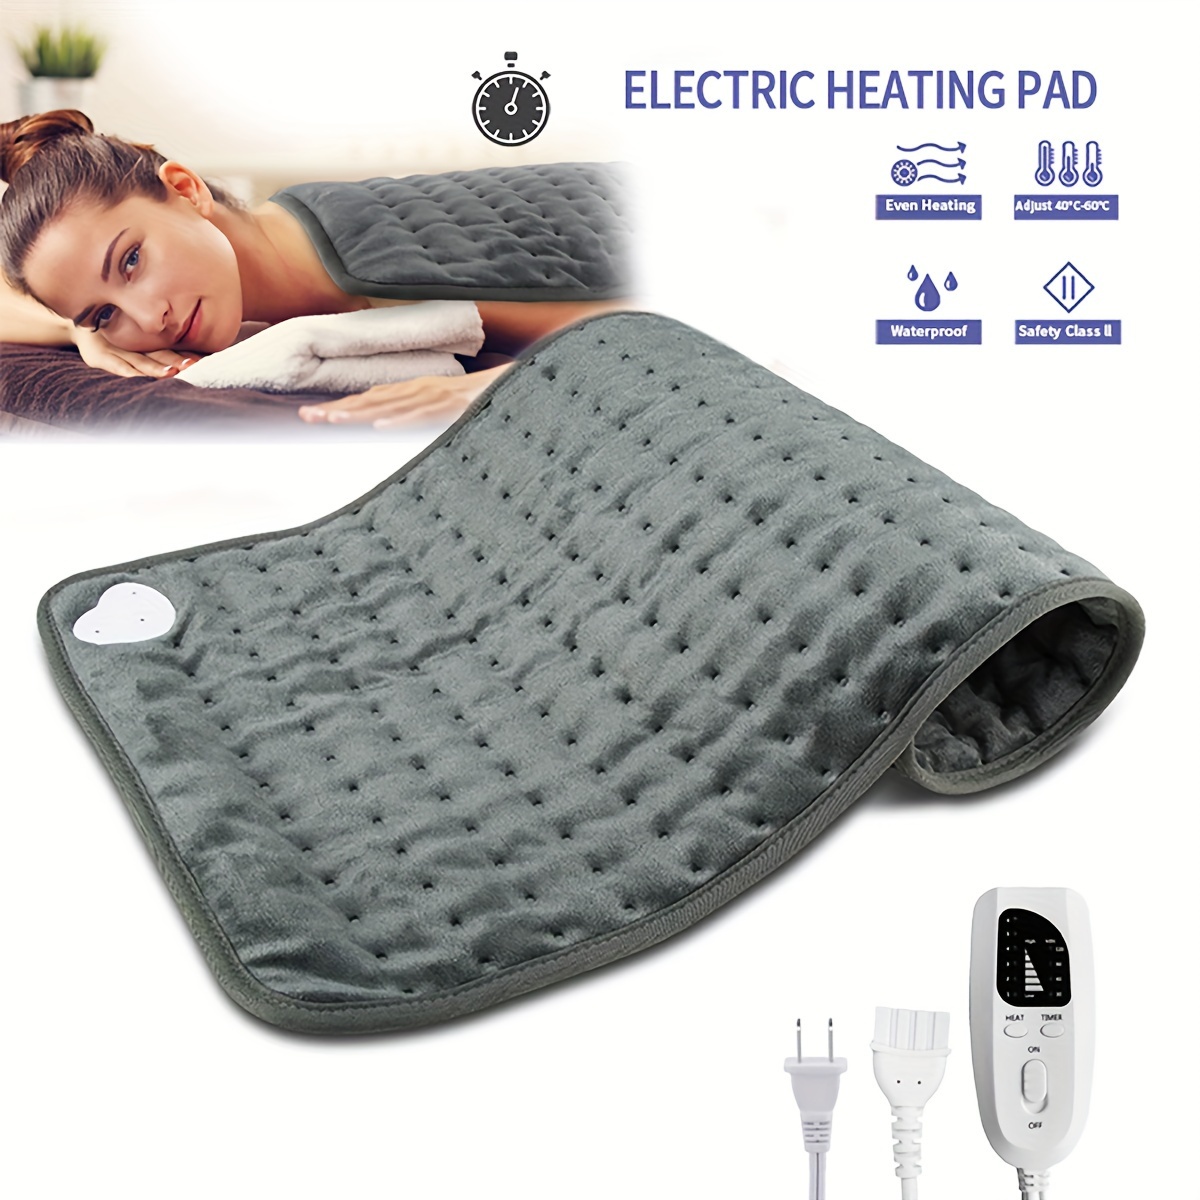 

1pc Electric Heating Pad With 6 Temperature Settings, 120-min Auto-off Timer, Therapeutic Heat For Neck, Shoulders, Back, Abdomen, Legs, Contemporary Style, Ideal For Personal Use & Gifting